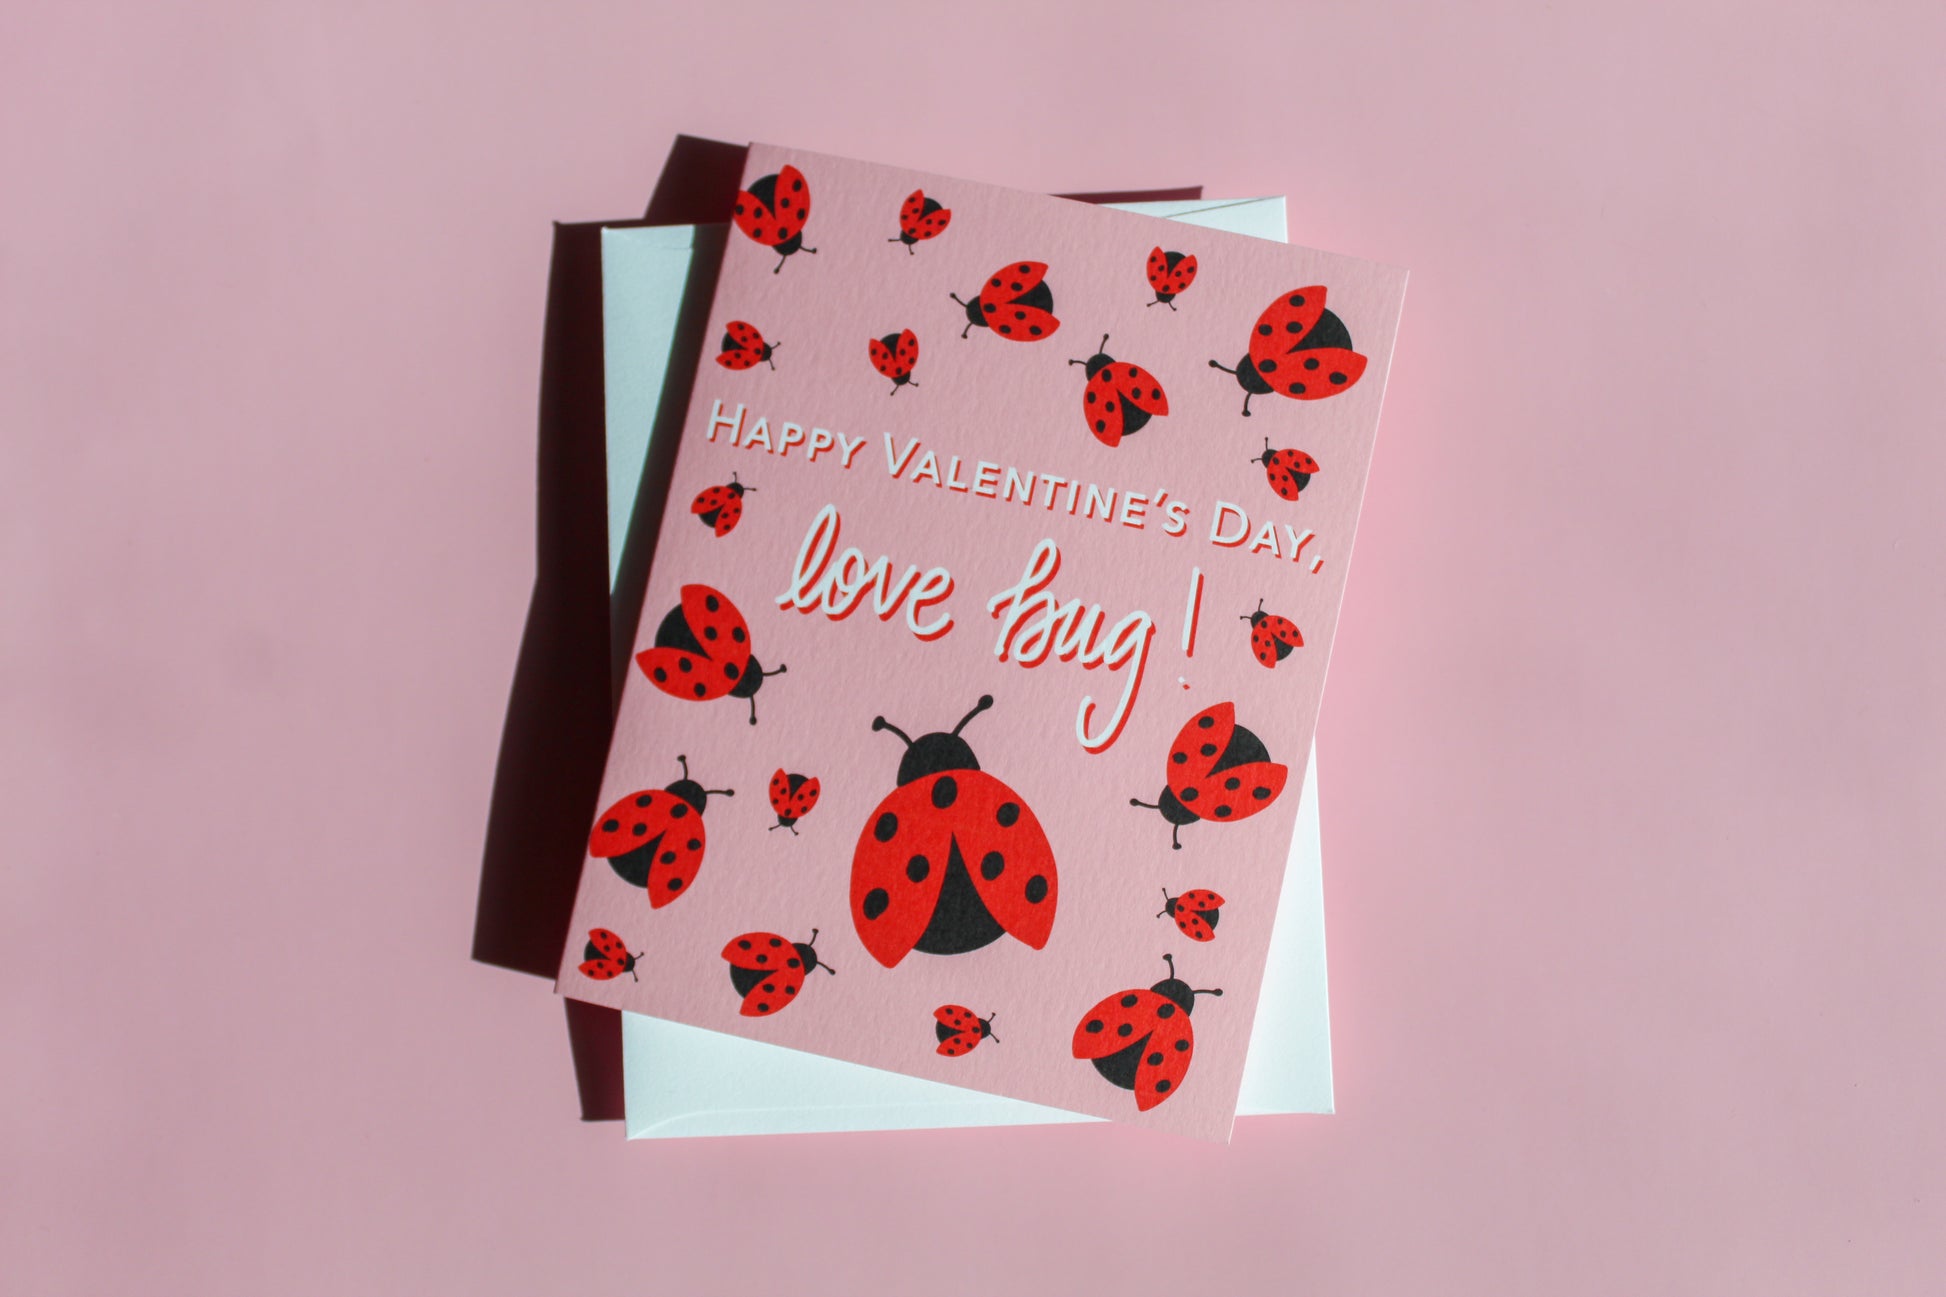 Our "Happy Valentine's Day, Love Bug!" Valentine's Day card features hand drawn lady bugs on a pink background - it is perfect for a kid or adult! Each card is folded to 4.25" tall by 5.5" wide, is blank inside and comes with a matching white envelope. Cards are packaged in cellophane sleeves.